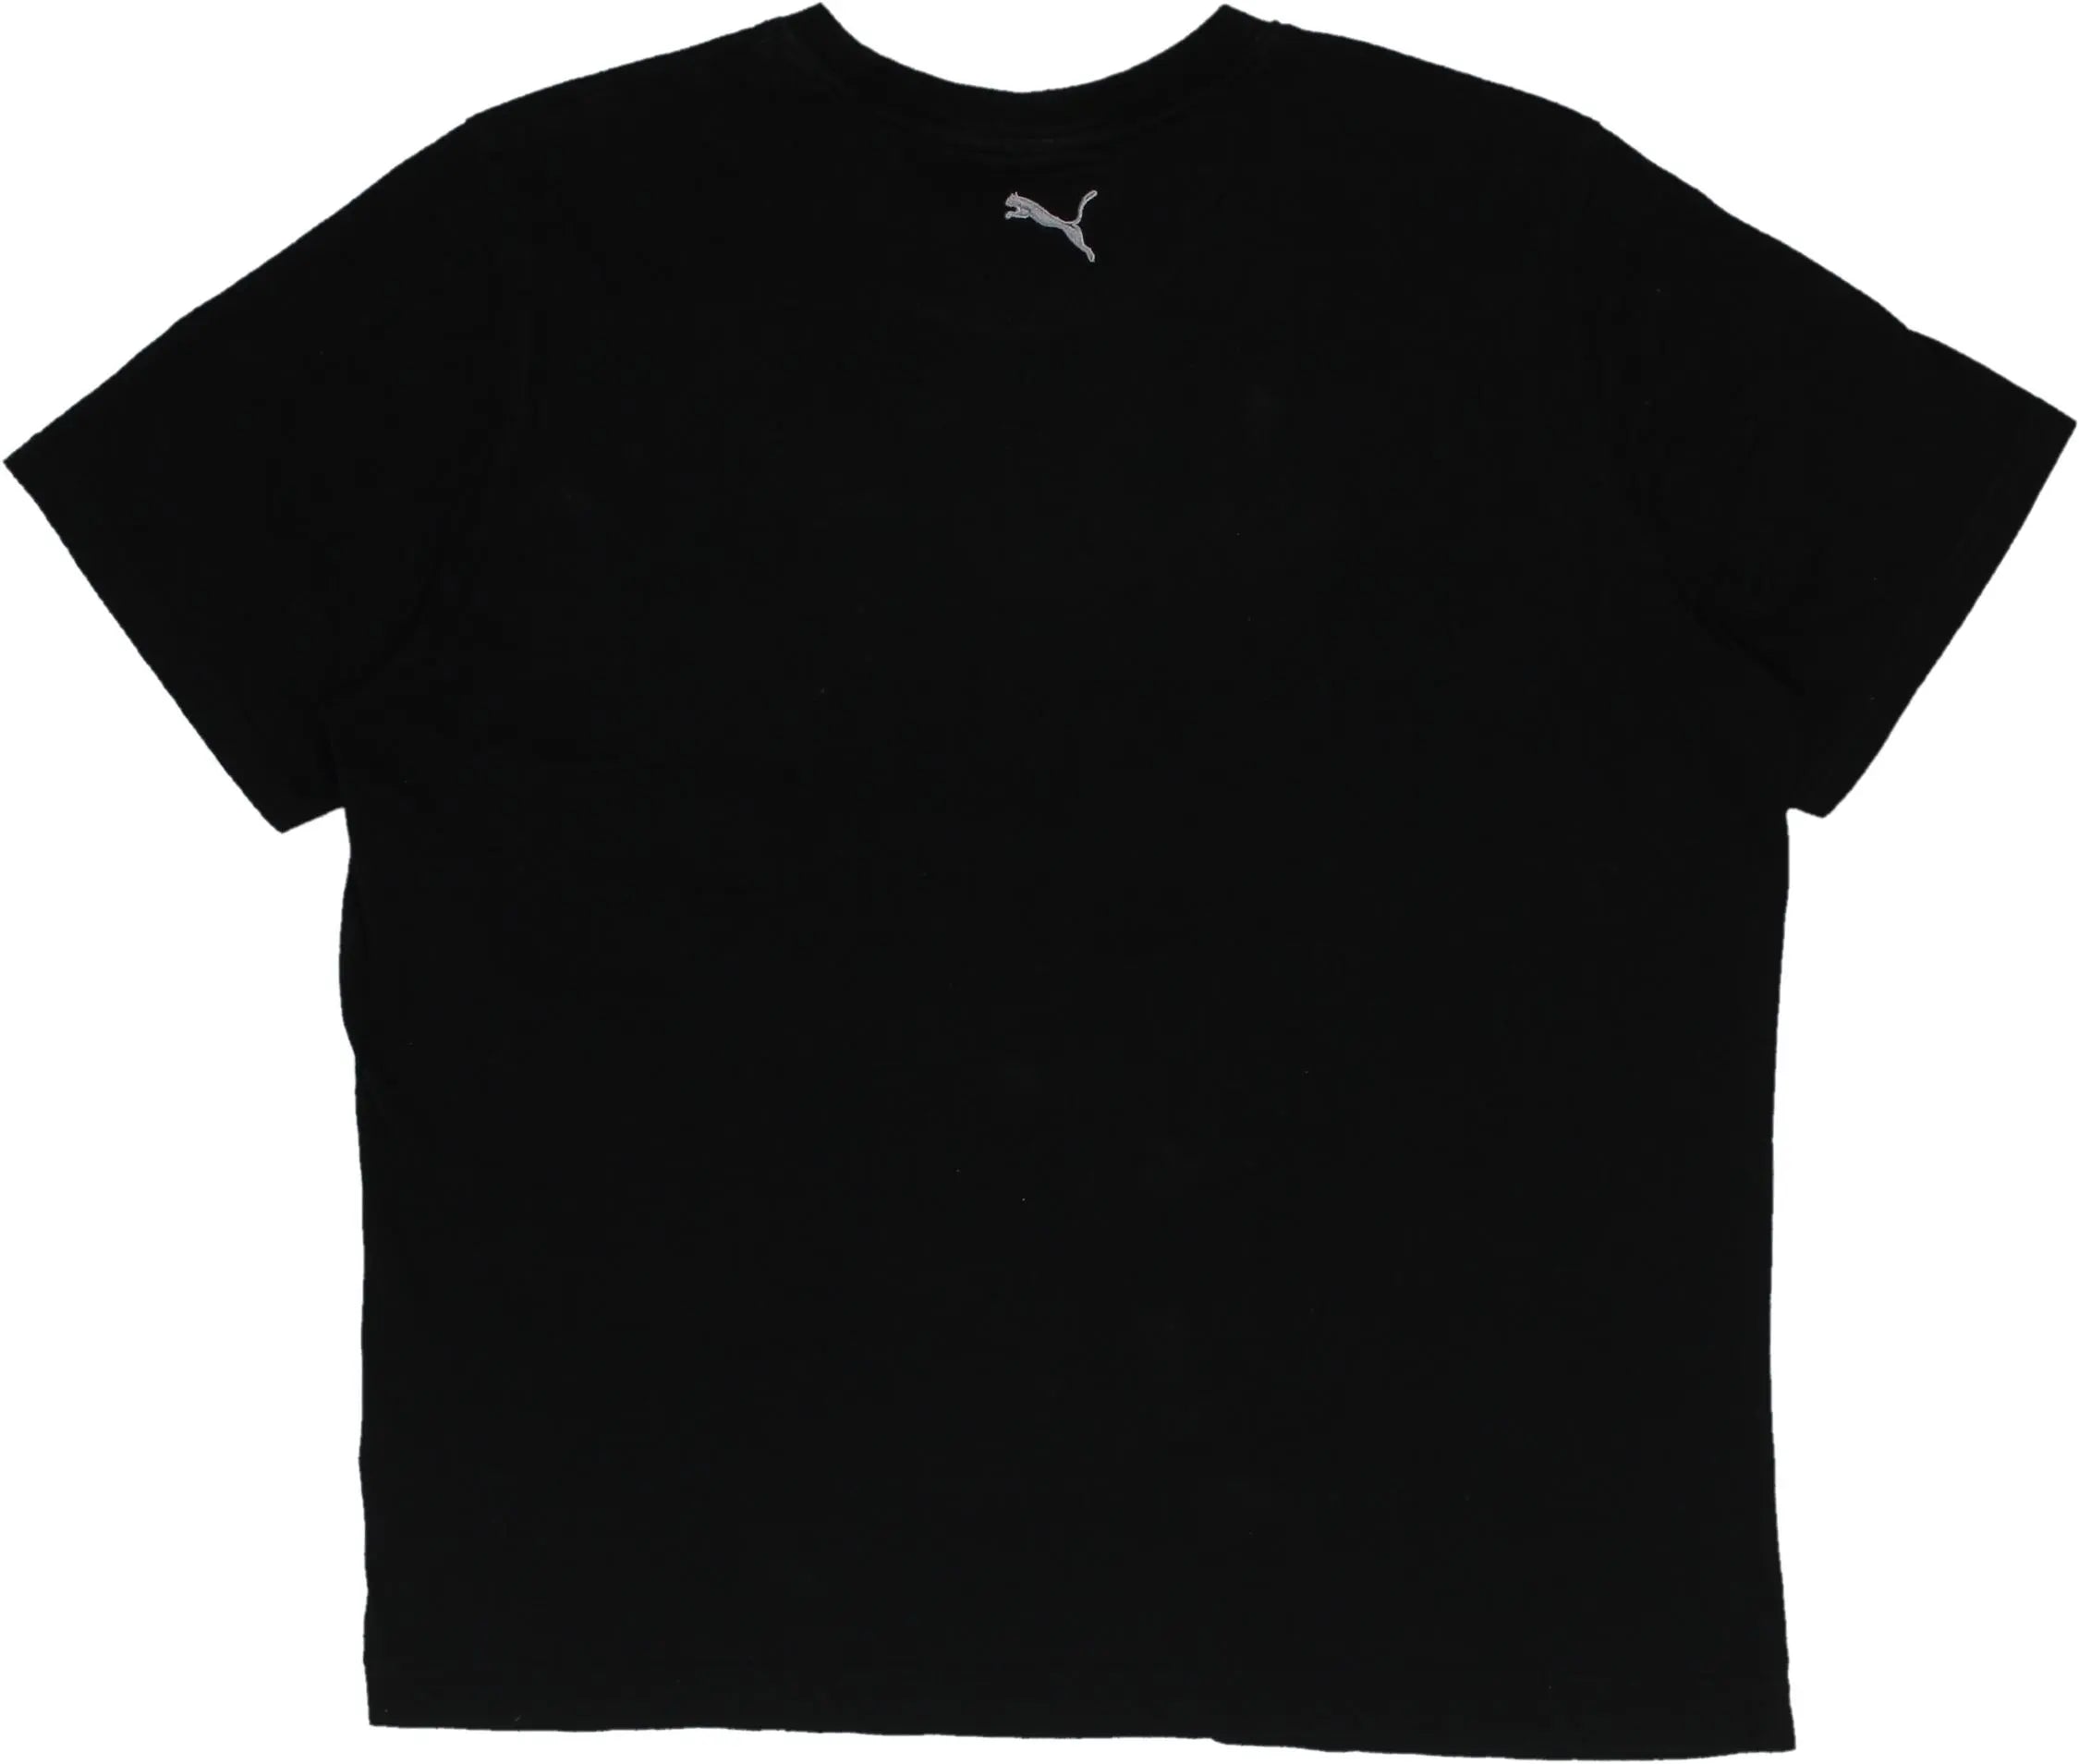 Puma - Black T-shirt by Puma- ThriftTale.com - Vintage and second handclothing